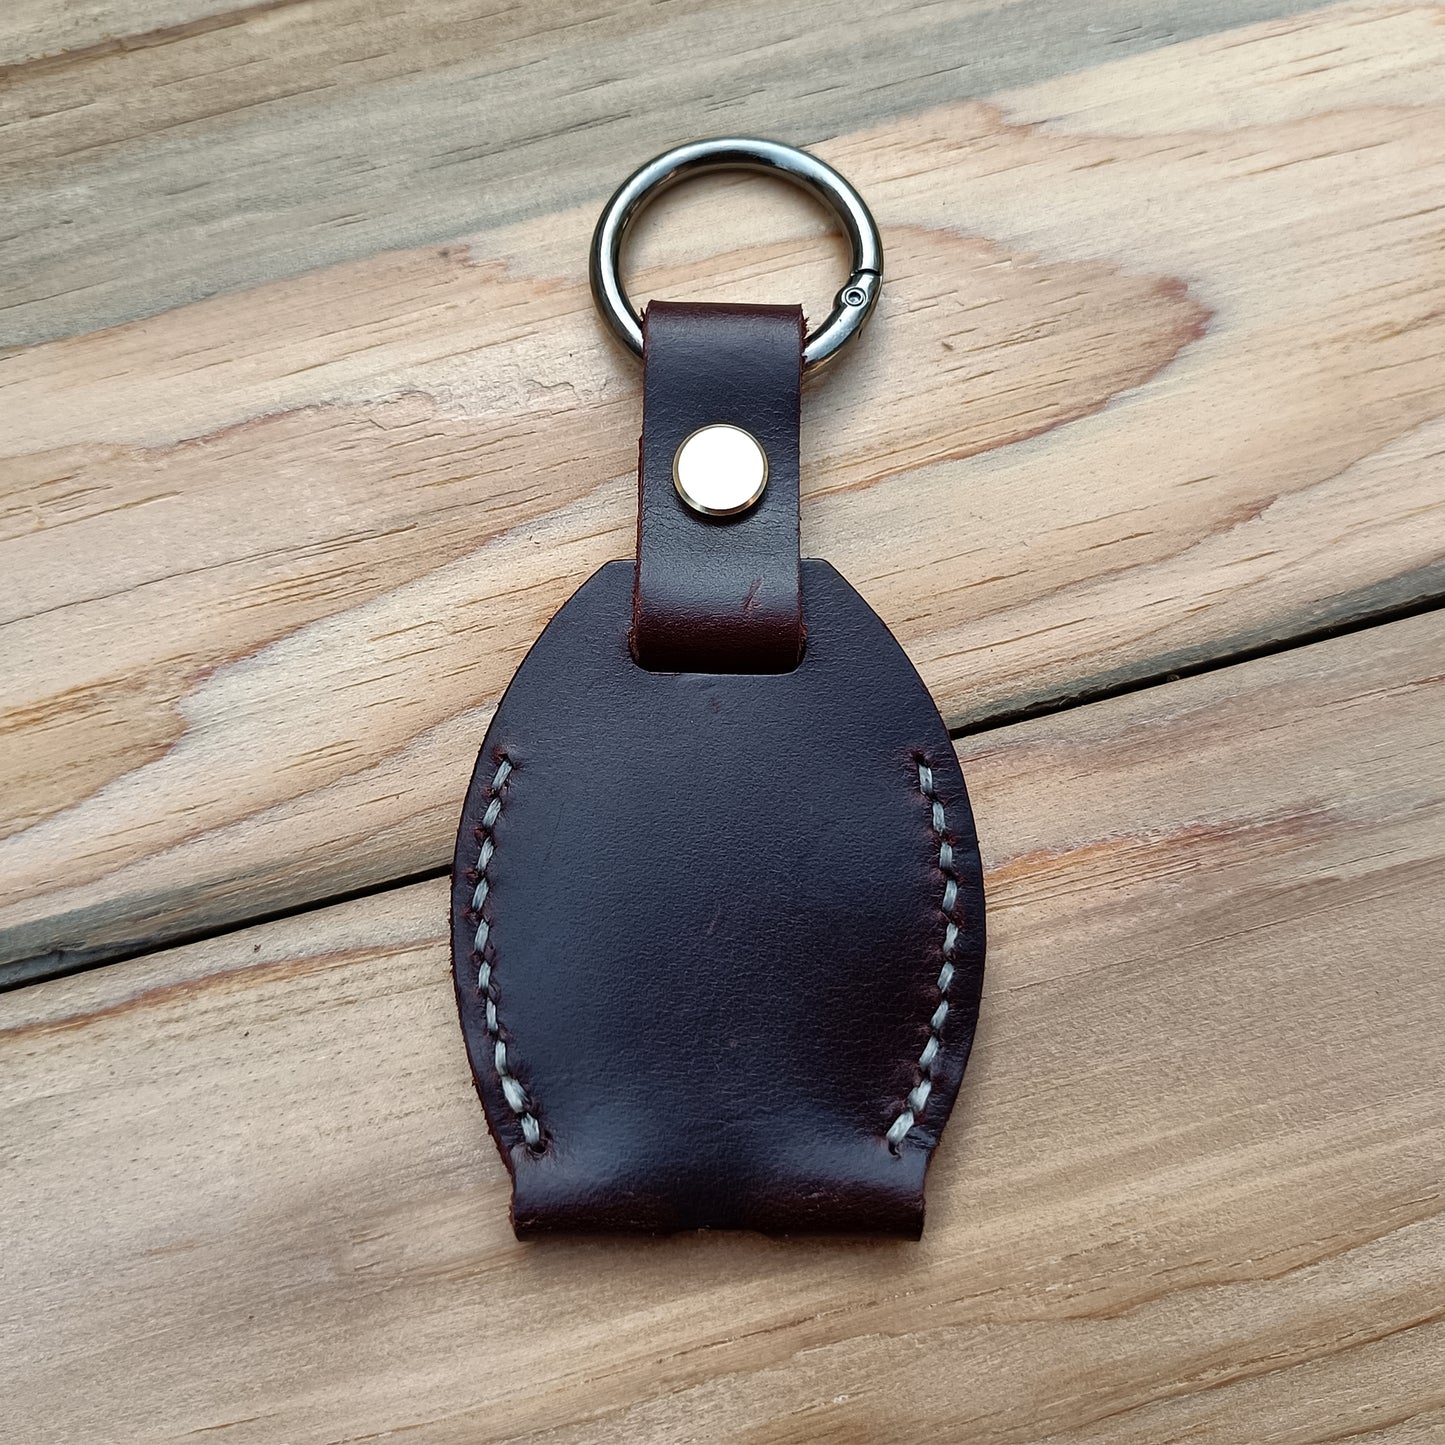 Handmade Keychain Leather Protective Key Holder Large Capacity Protective Case Key Cover Protective Case Keychain